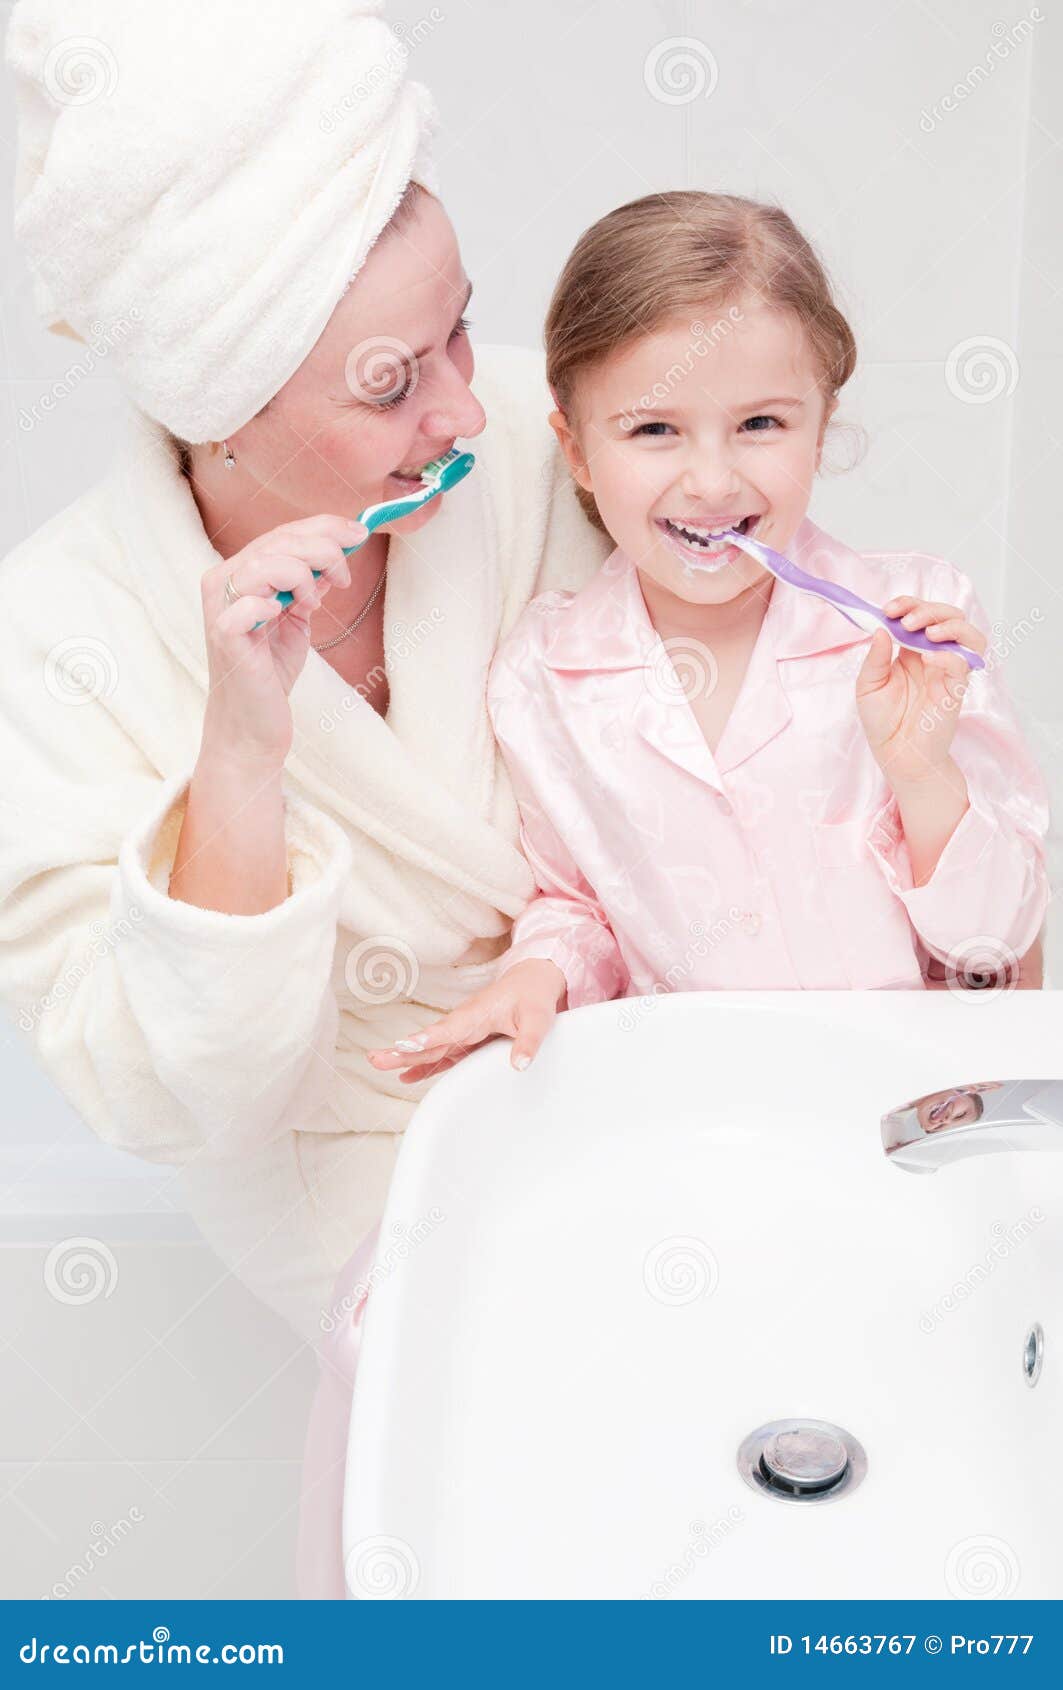 Brushing teeth together. Little girl with mother brushing teeth in bathroom